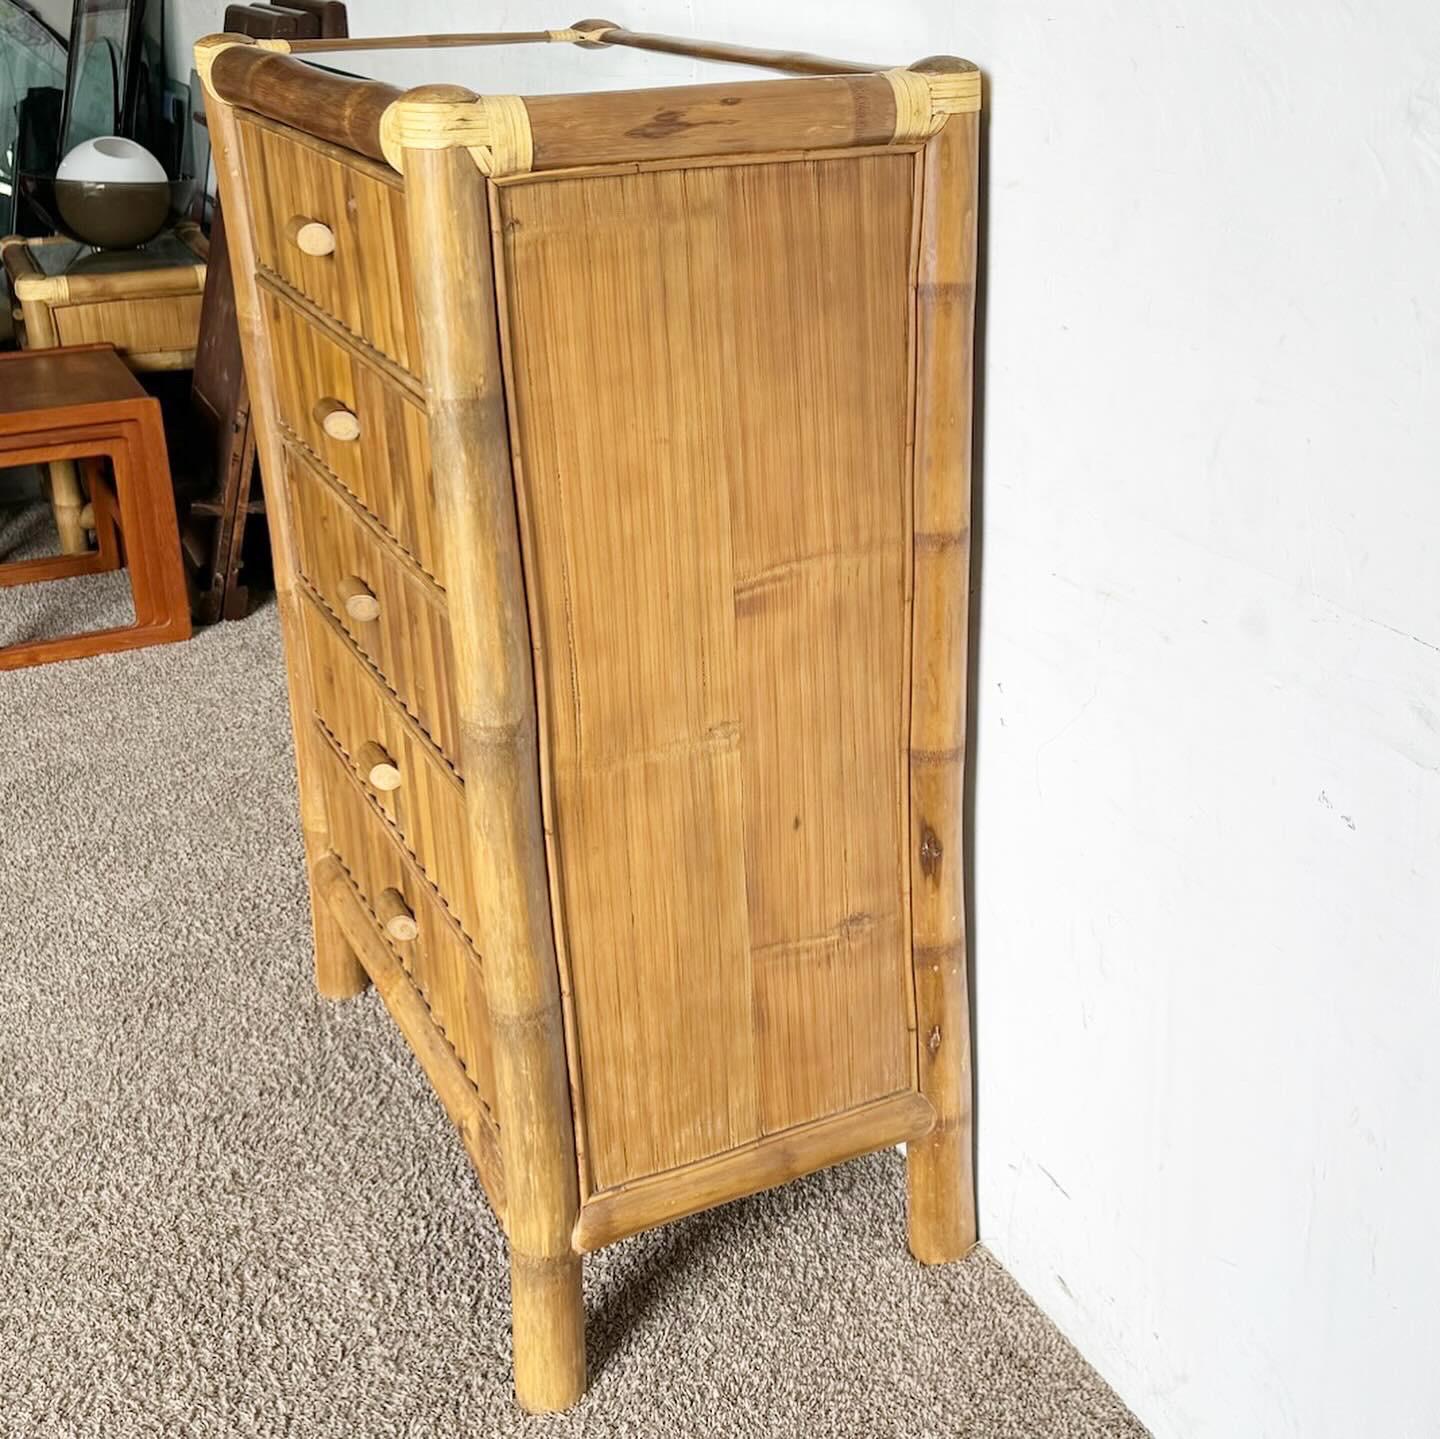 Boho Chic Bamboo Rattan Highboy Dresser - 5 Drawers In Good Condition For Sale In Delray Beach, FL